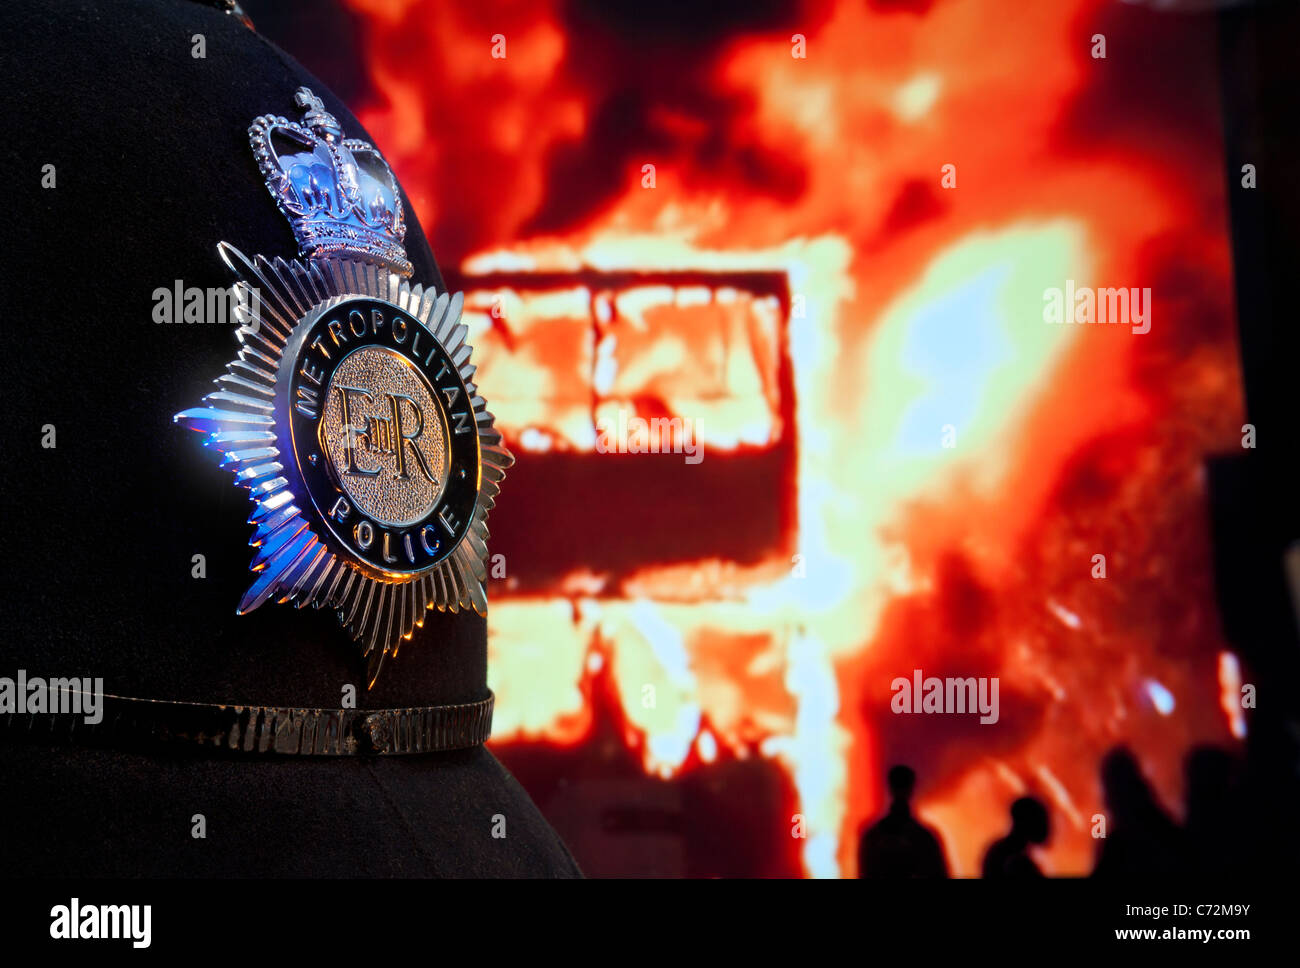 London riots Met police helmet & badge with fire flames rioters London bus in flames behind. Looting Riots London lawless streets Police Arrest Stock Photo